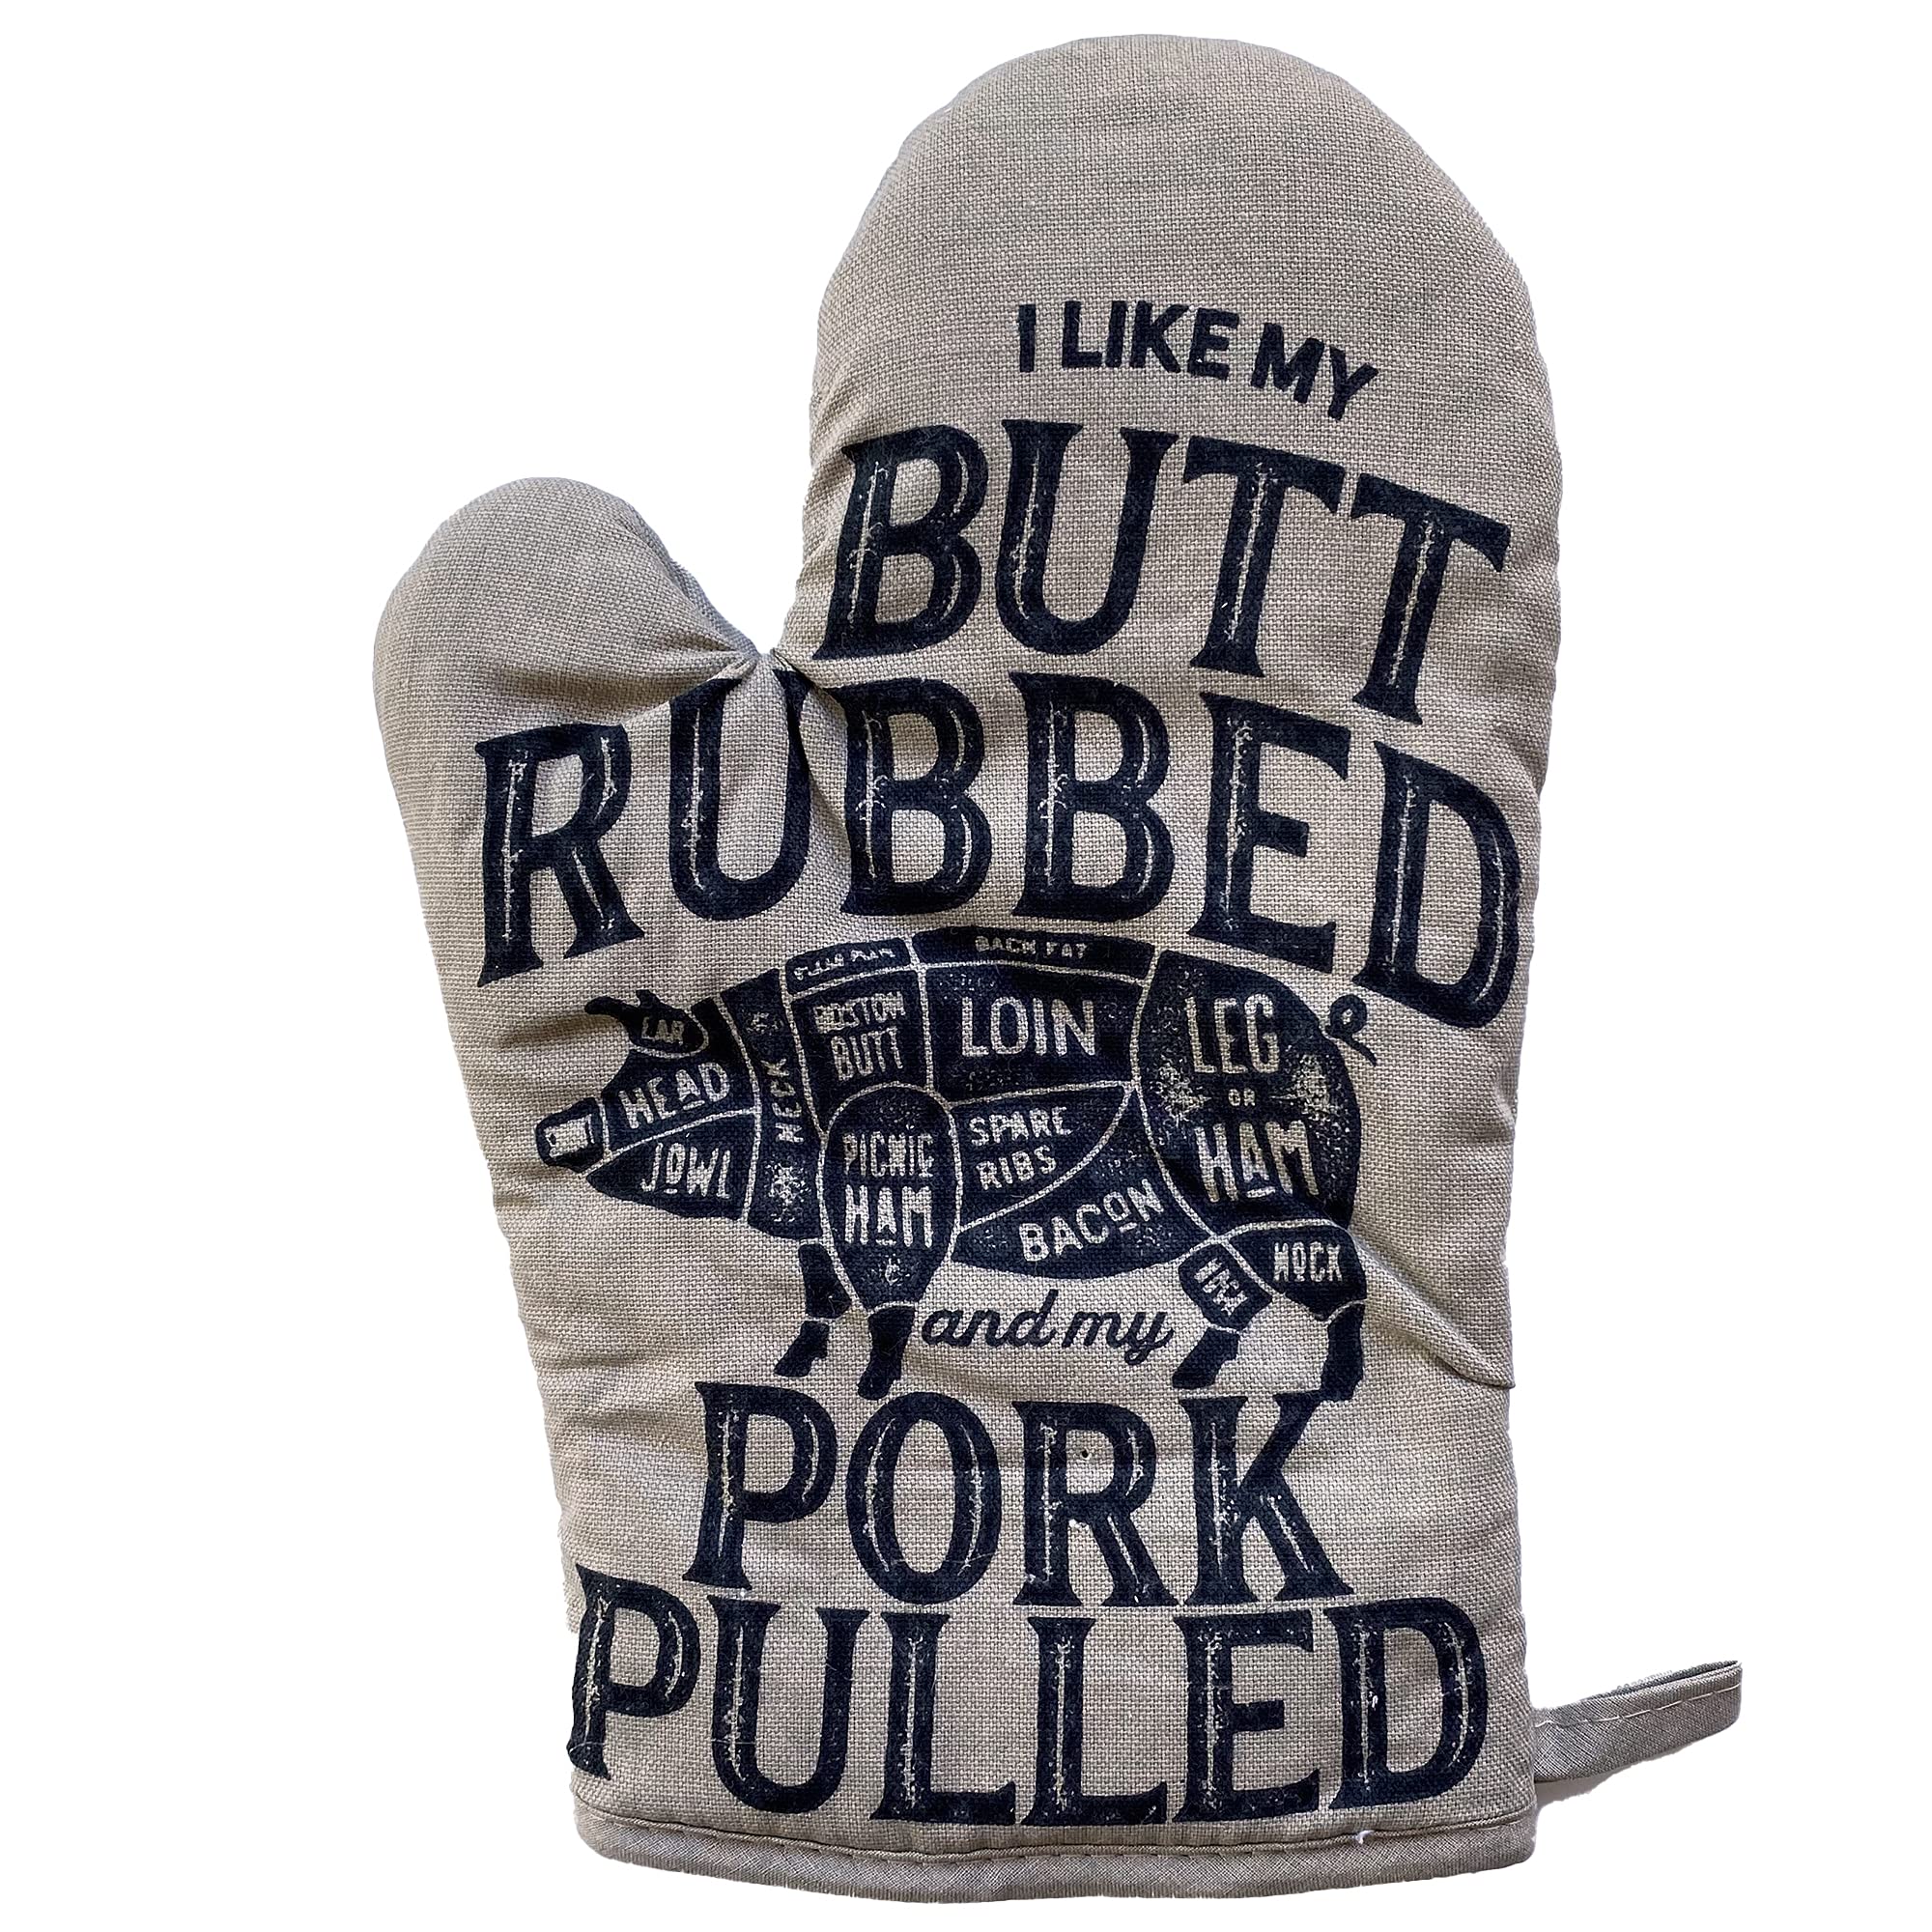 I Like My Butt Rubbed and My Pork Pulled Oven Mitt Funny BBQ Grilling Cookout Kitchen Glove Funny Graphic Kitchenwear Funny Food Novelty Cookware Grey Oven Mitt